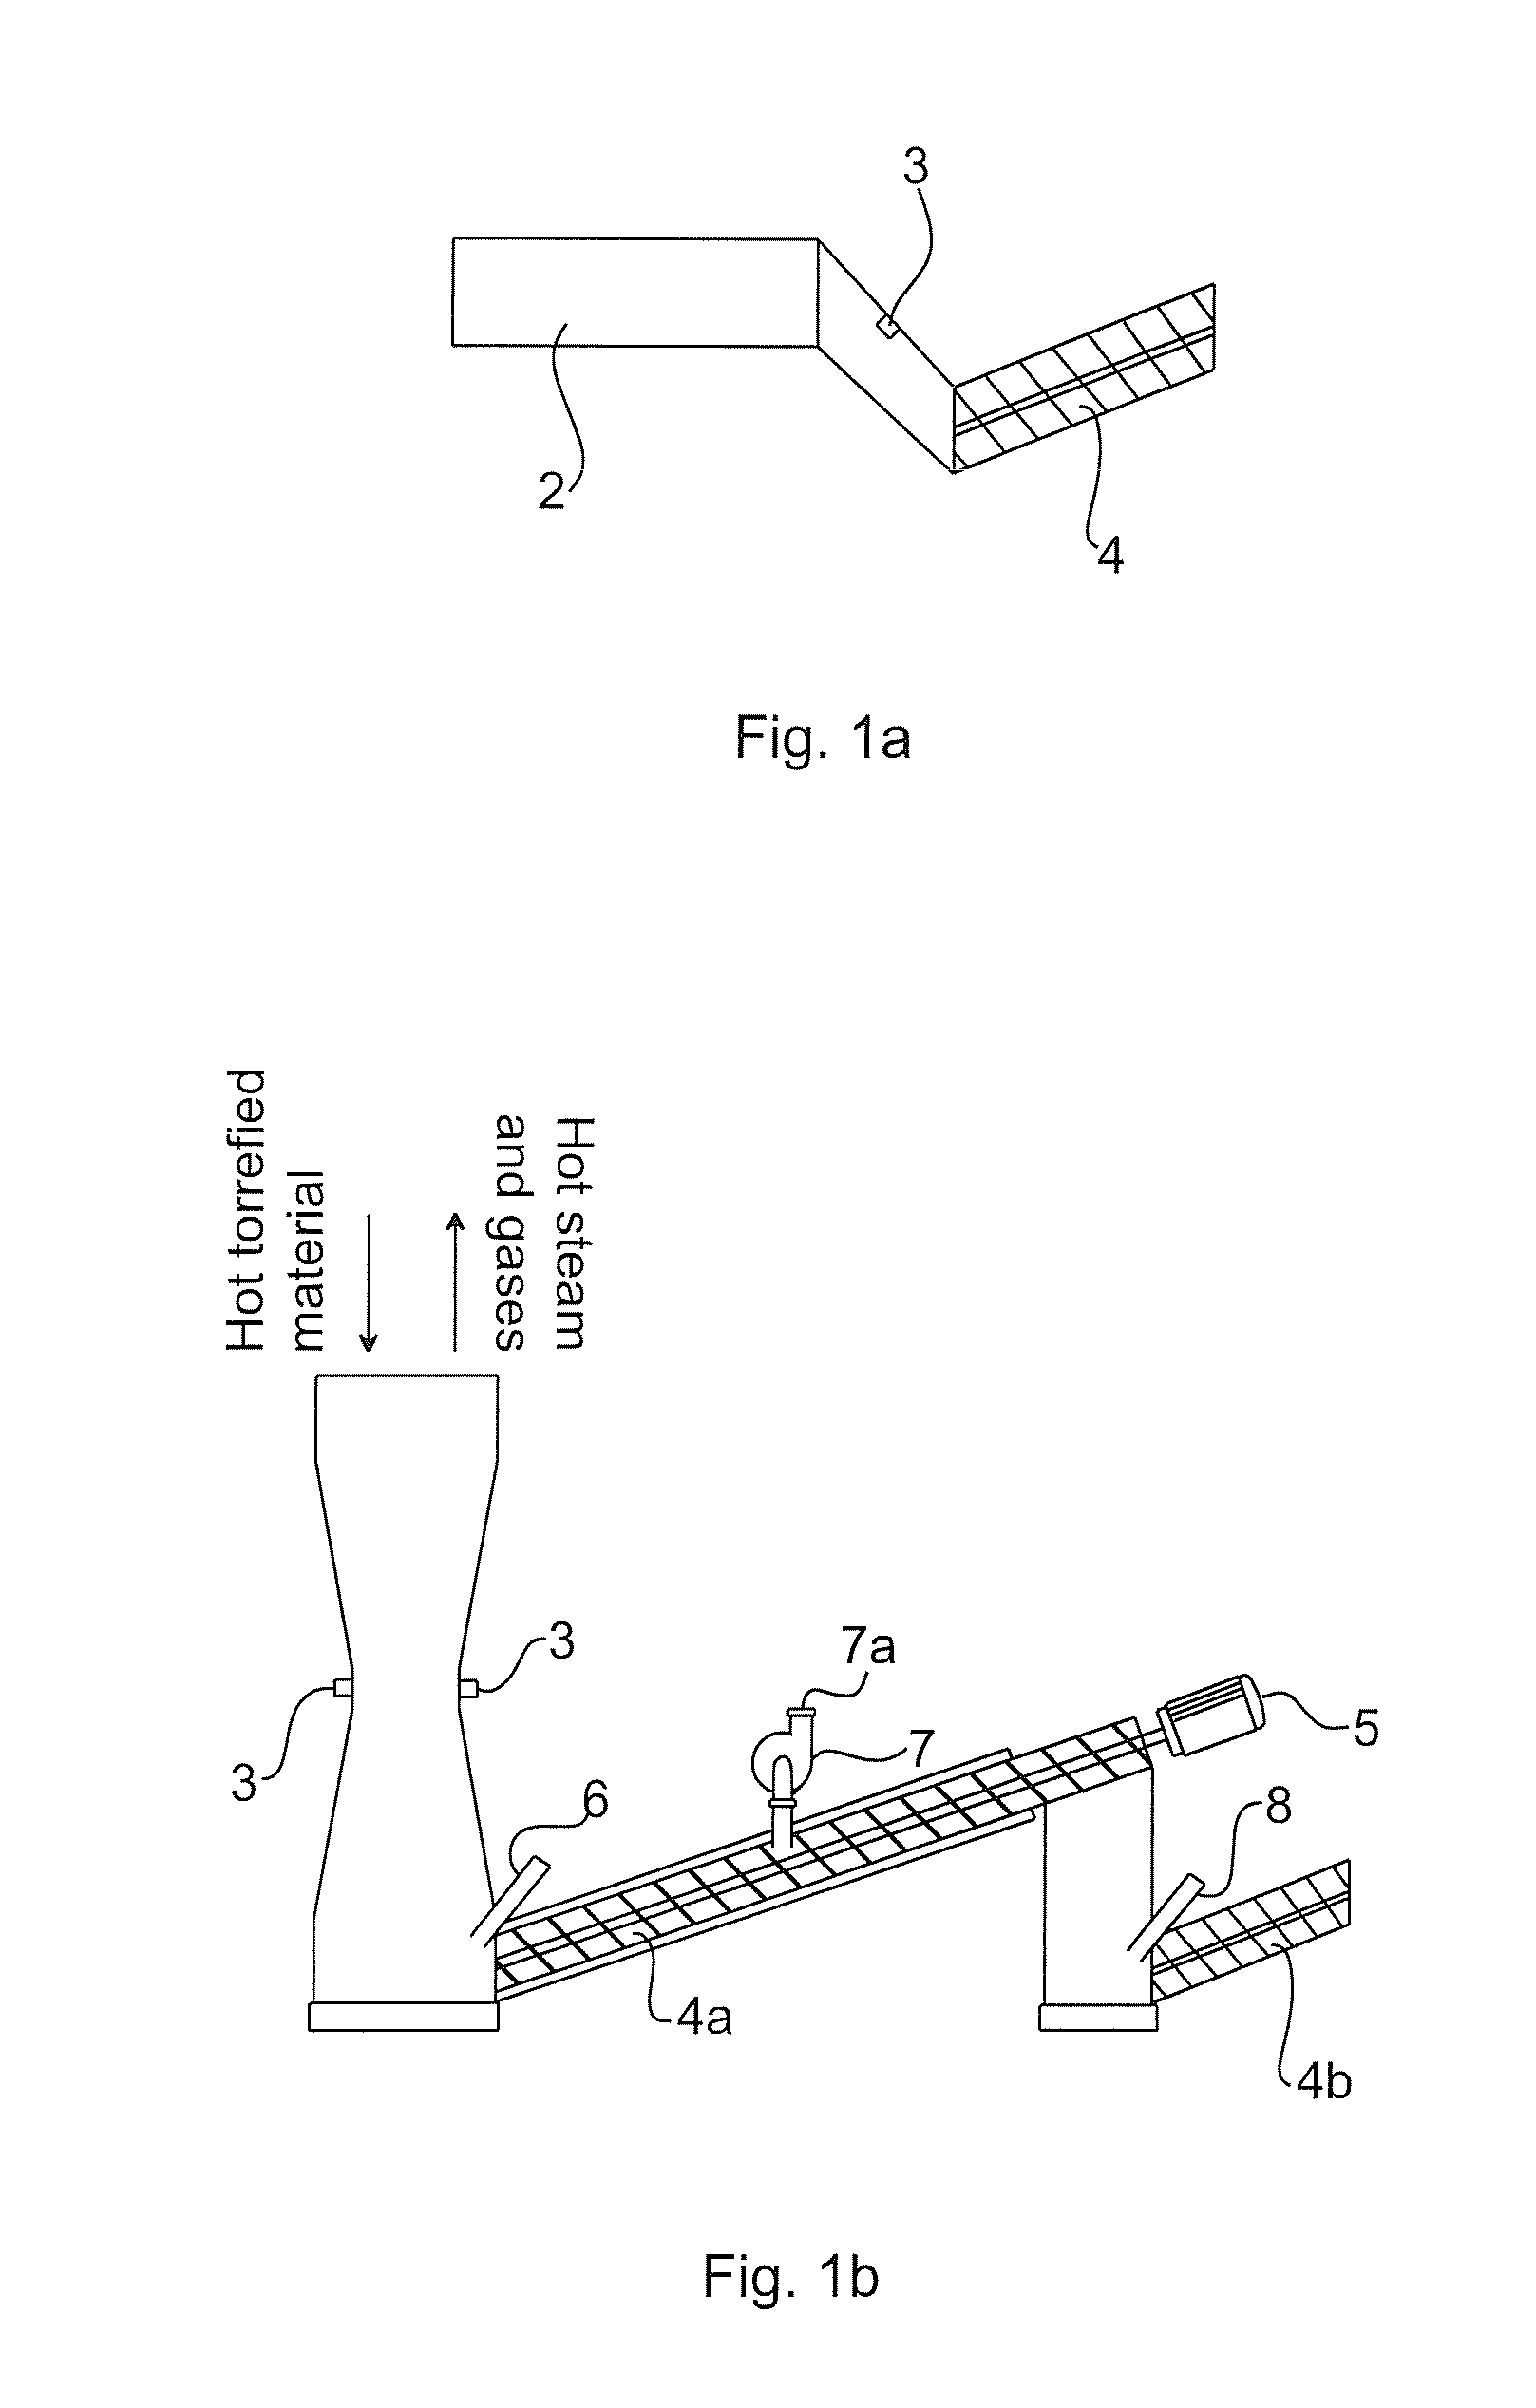 Method for Cooling and Increasing Yield of a Torrefied Product